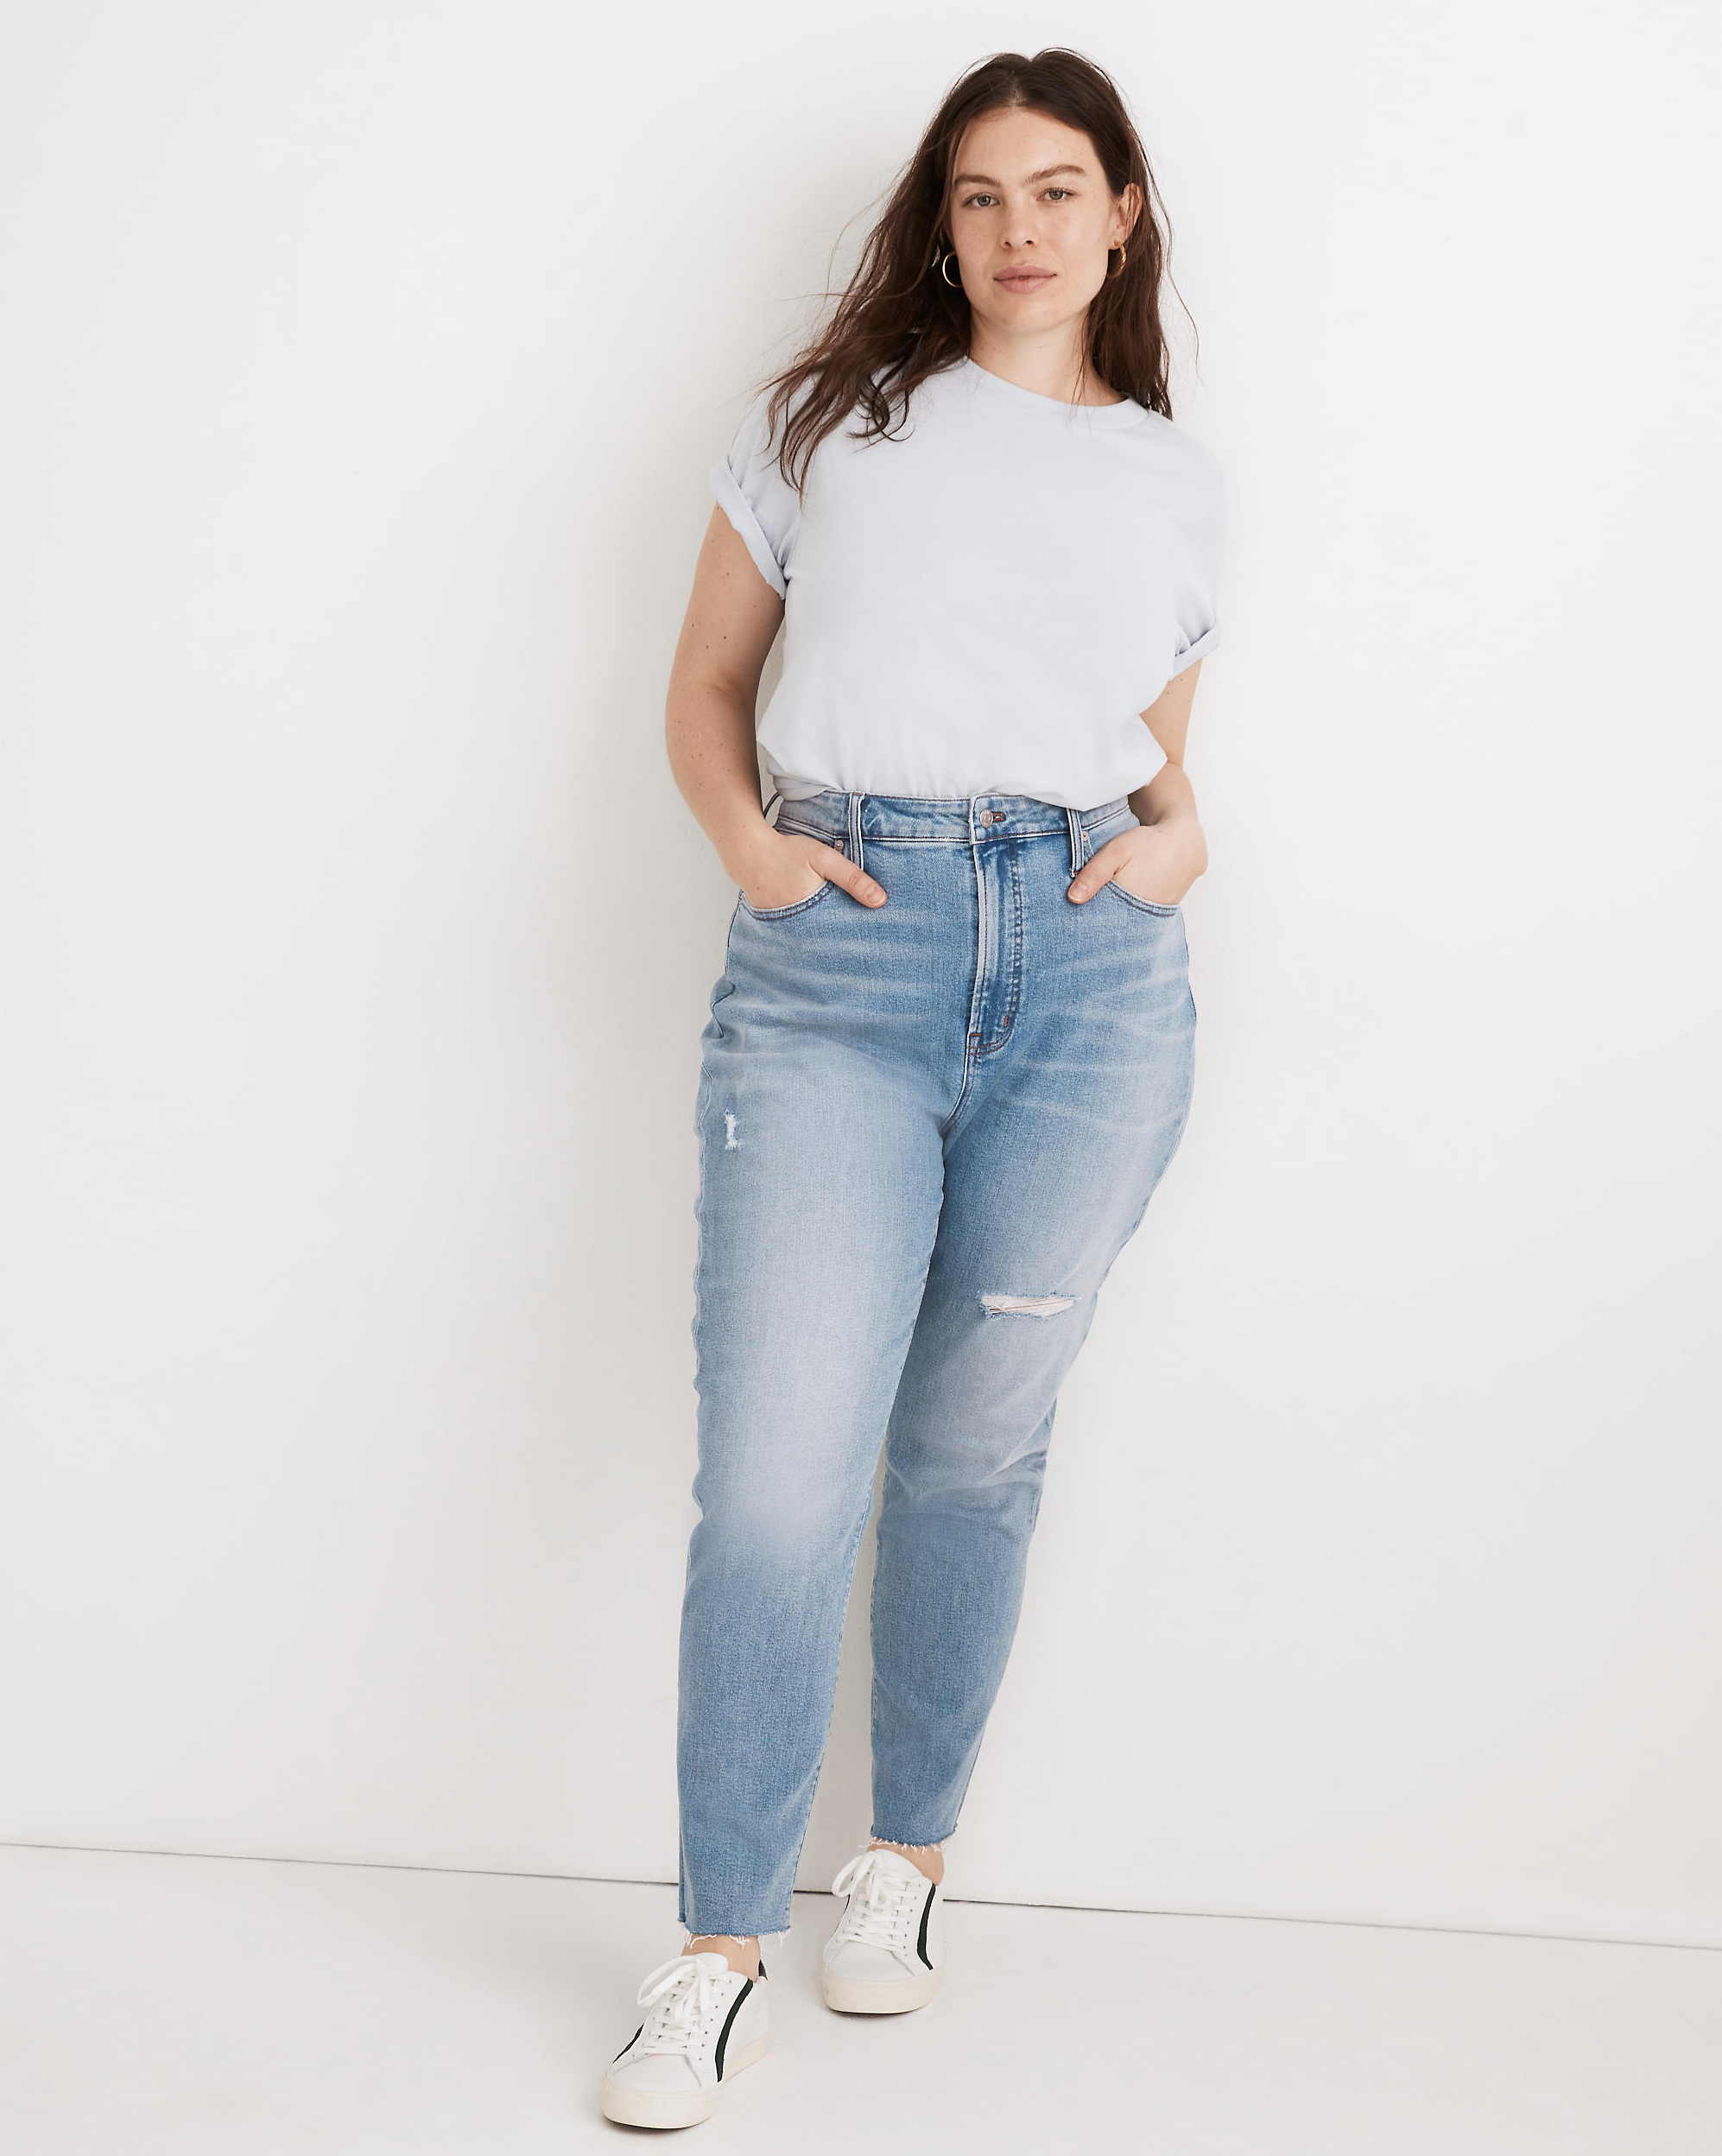 model wearing the high-waisted jeans